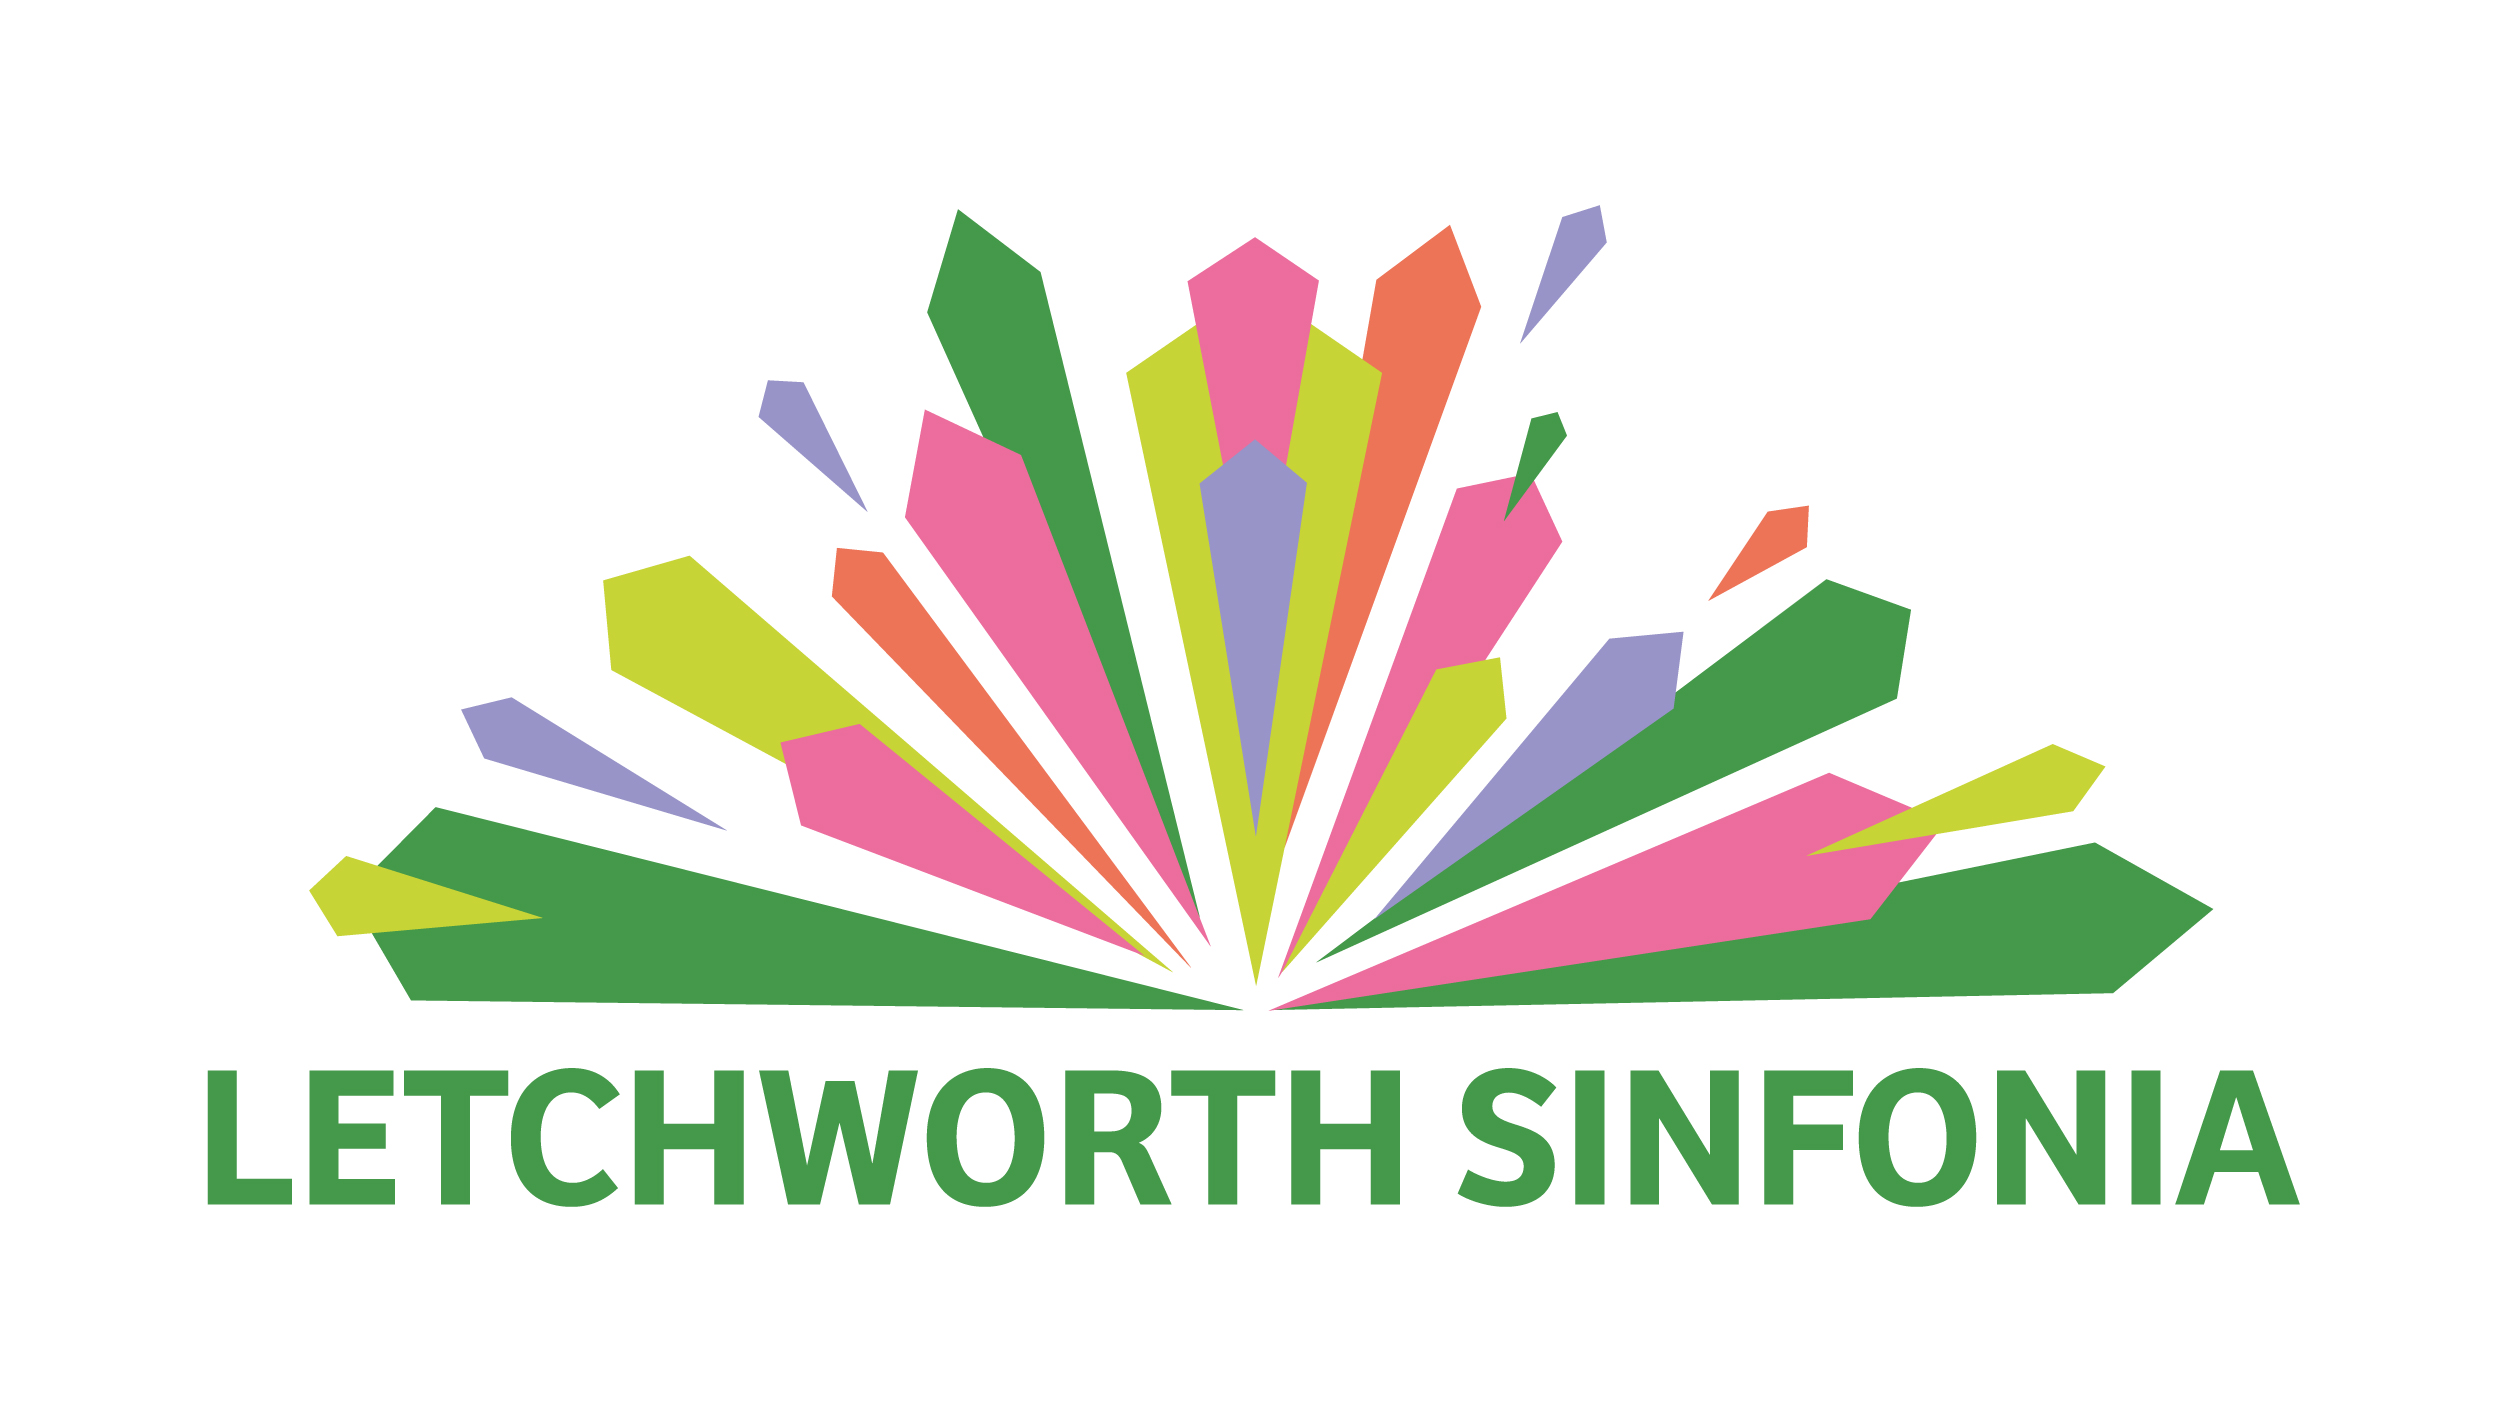 A new look for Letchworth Sinfonia